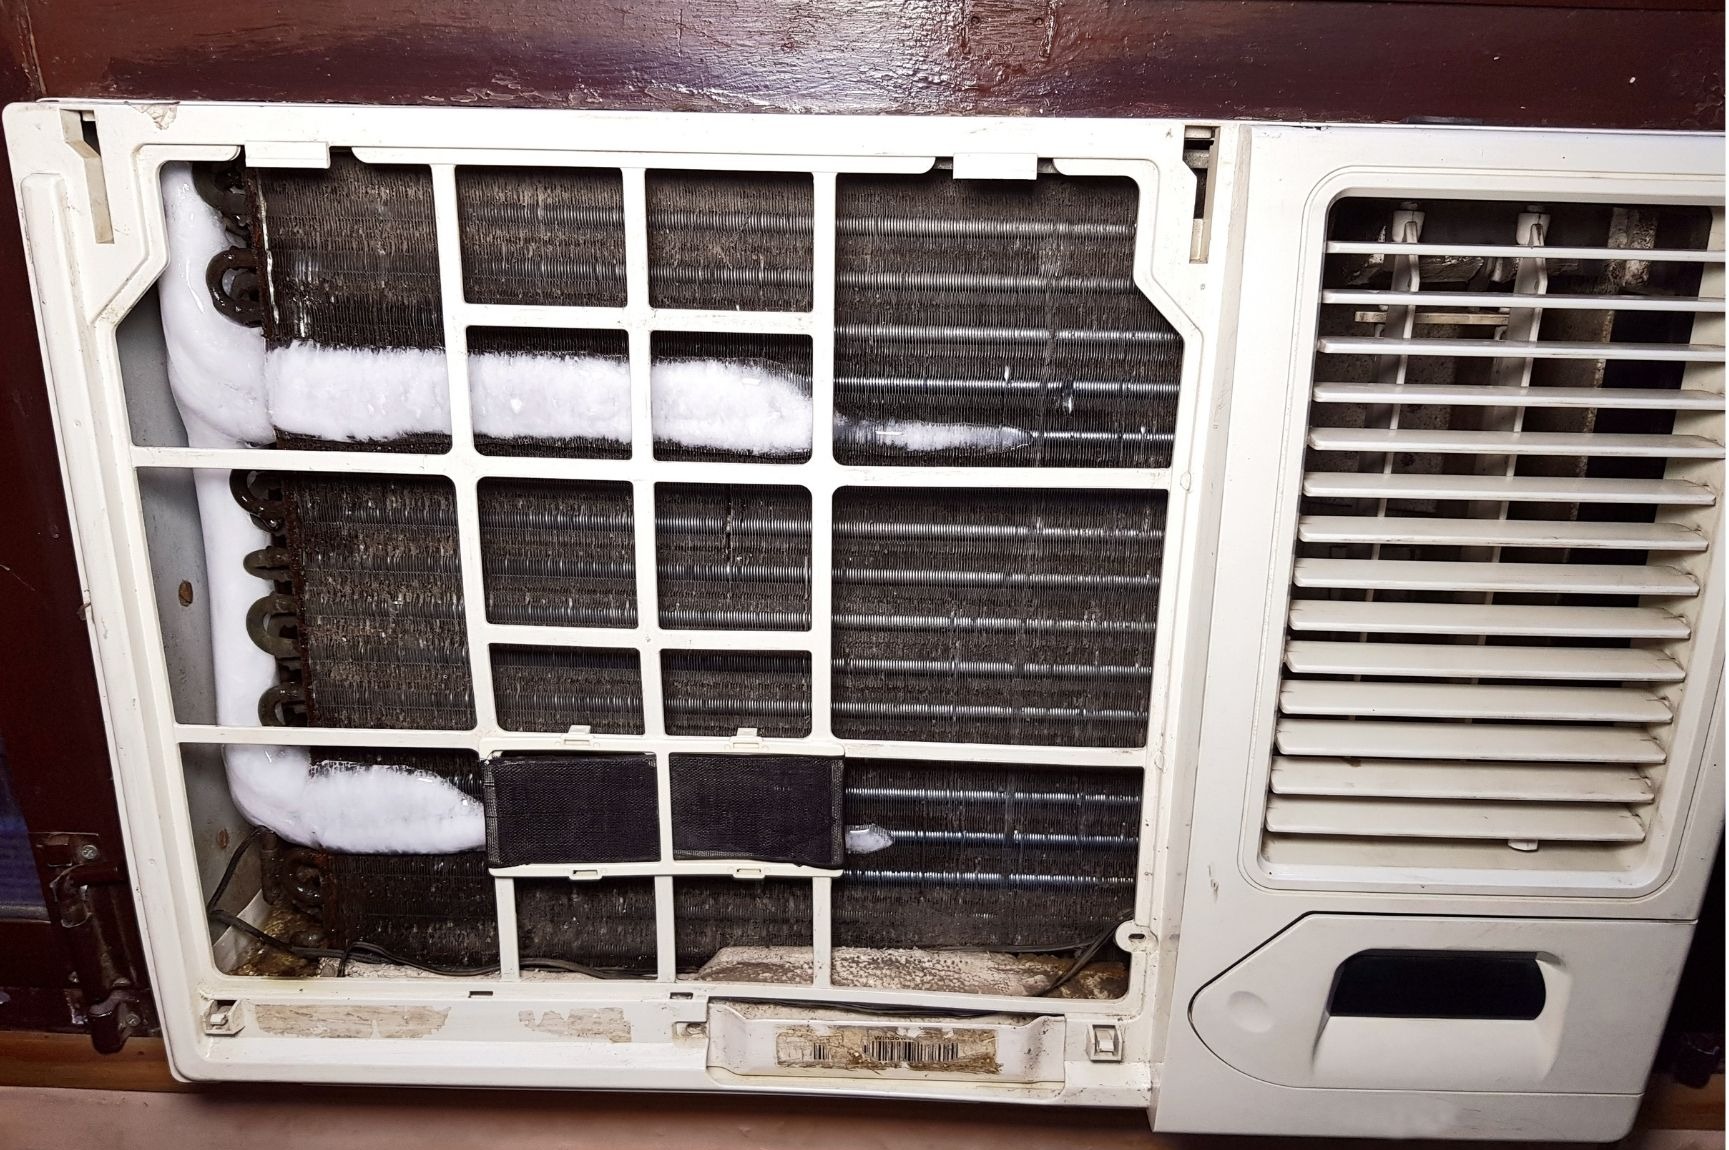 HOW TO CLEAN A WINDOW AC UNIT